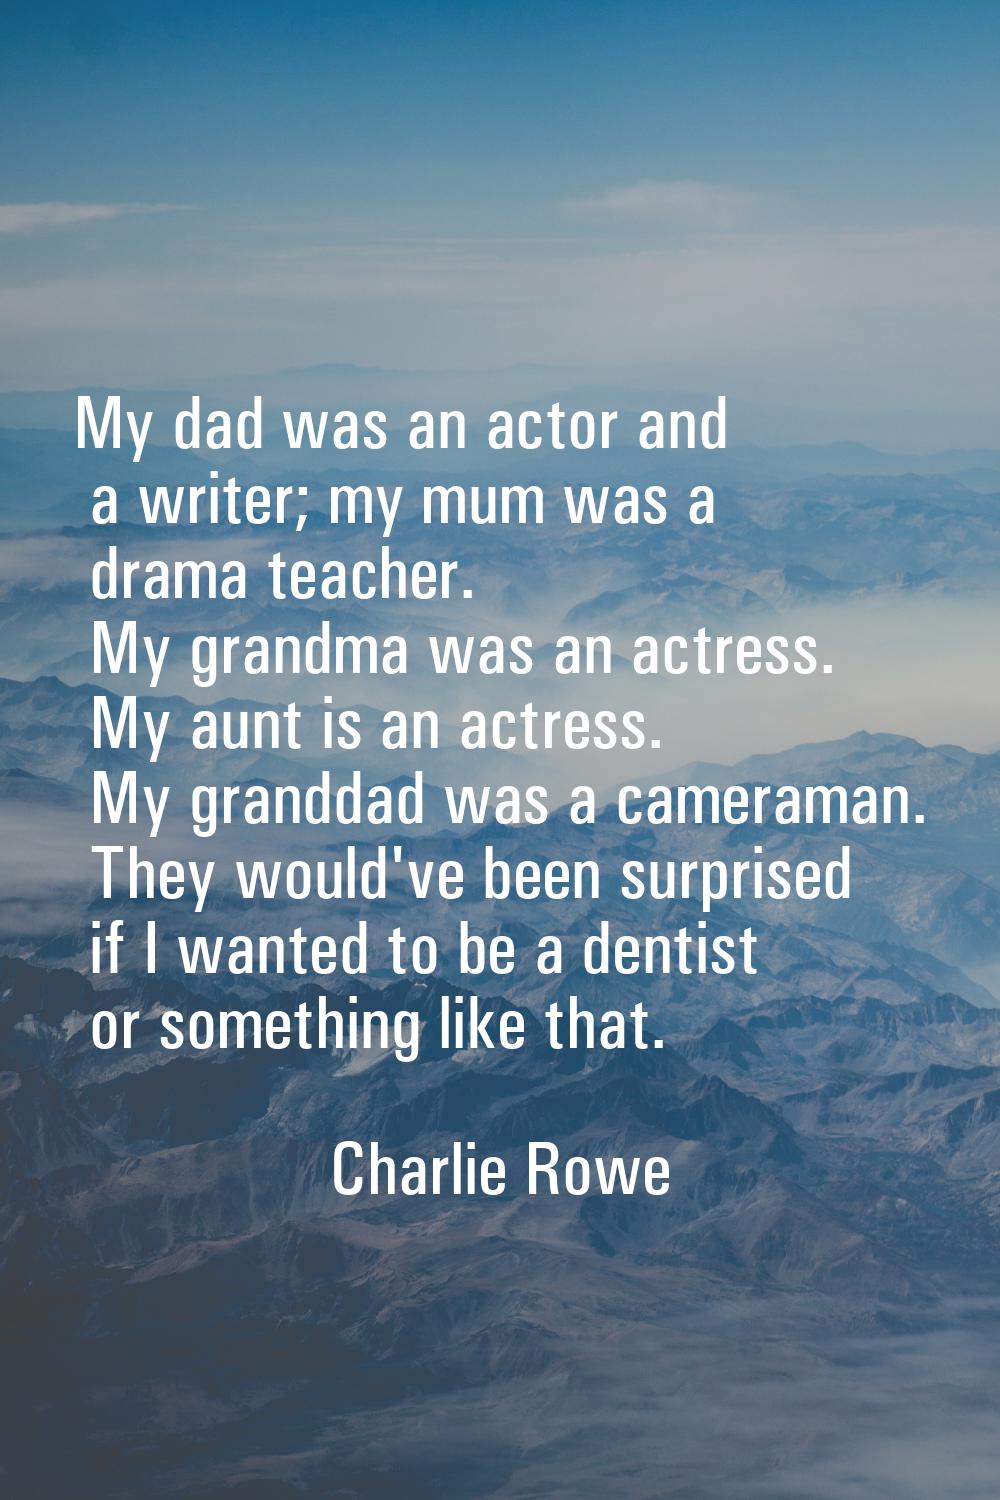 My dad was an actor and a writer; my mum was a drama teacher. My grandma was an actress. My aunt is